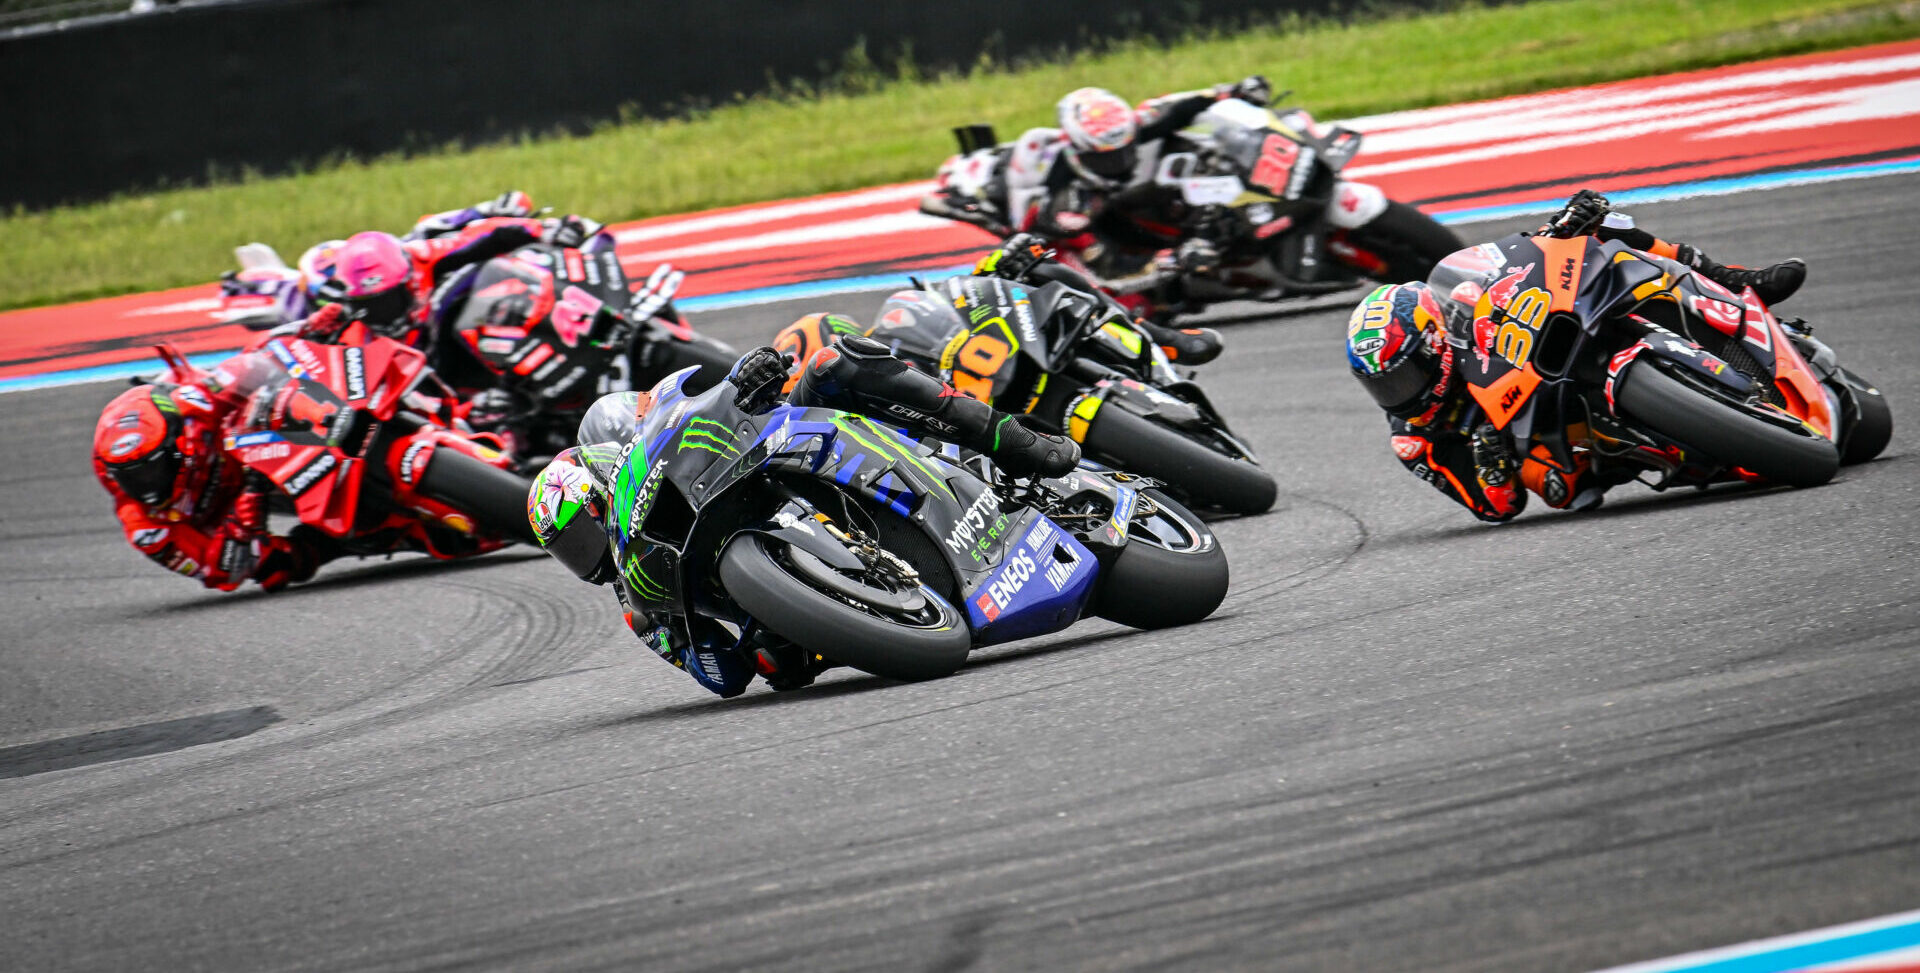 Fans who share their race predictions via MotoGP Guru will be eligible to win prizes and special experiences. Here, Franco Morbidelli (21) leads Brad Binder (33), Luca Marini (10), Francesco Bagnaia (1), Aleix Espargaro (41), and Takaaki Nakagami (30) during the Sprint in Argentina. Photo courtesy Monster Energy Yamaha.